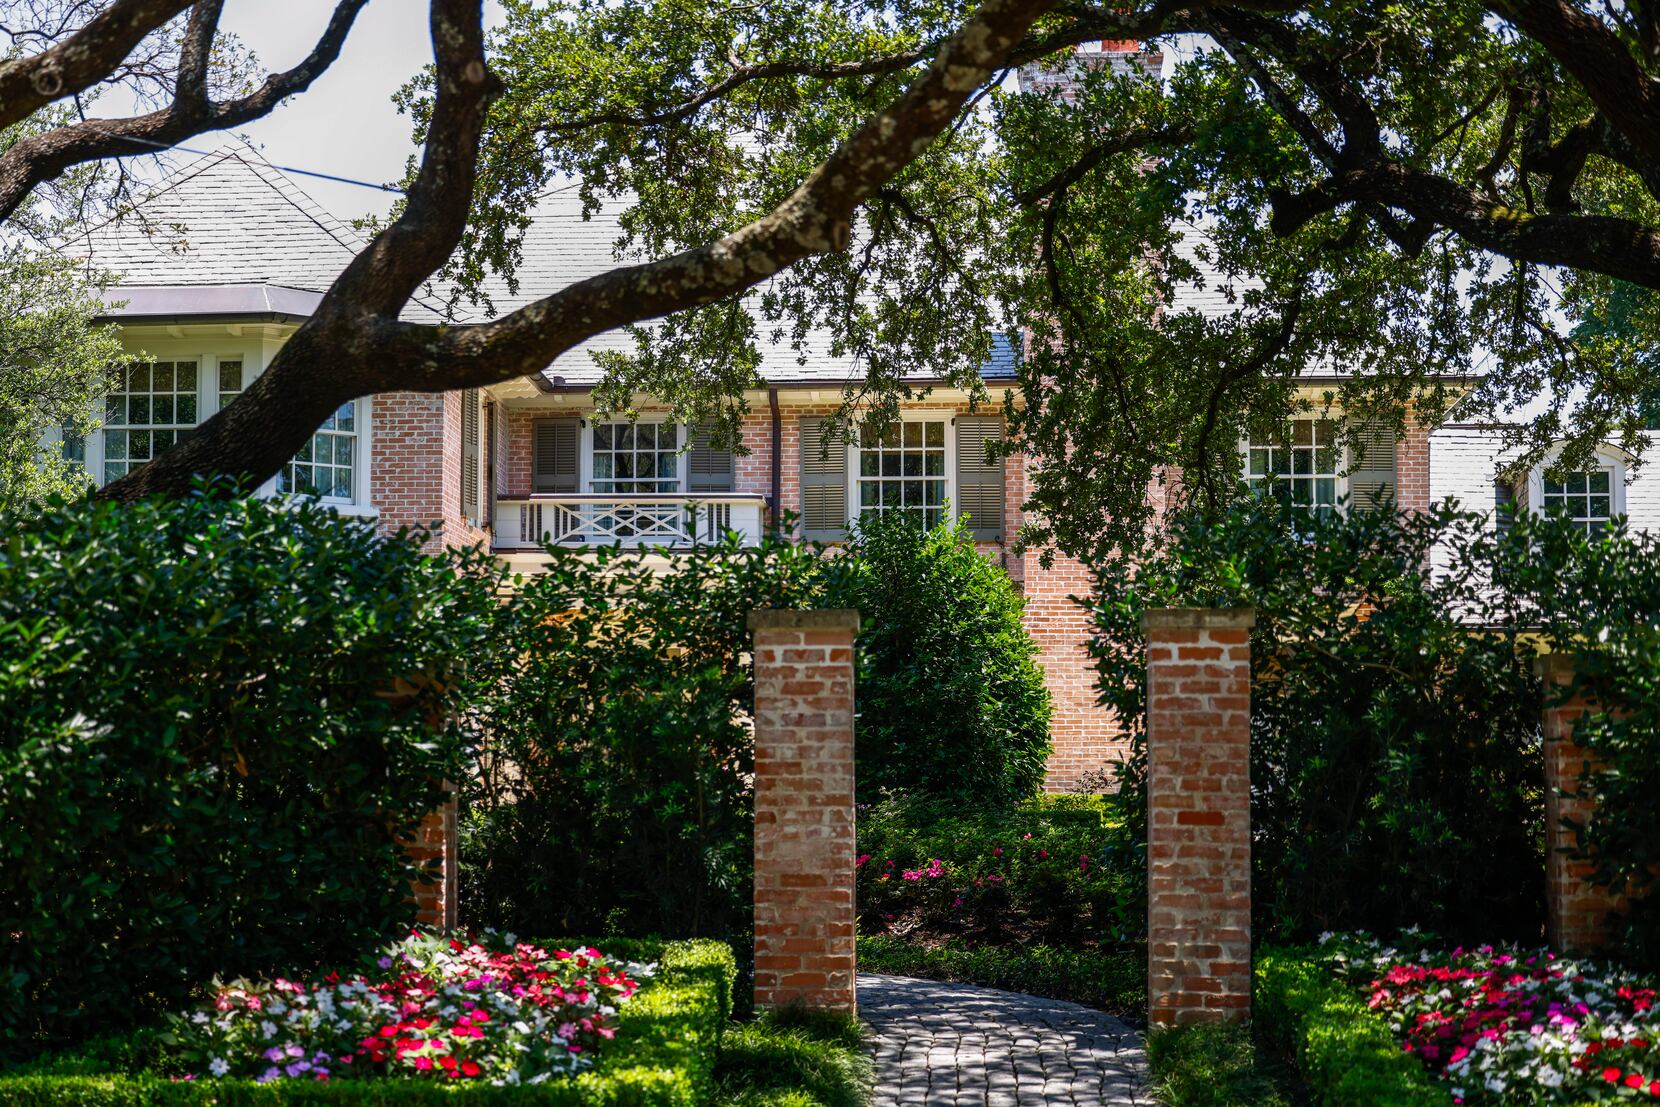 Houston ranks No. 2 on list of most million-dollar homes in Texas